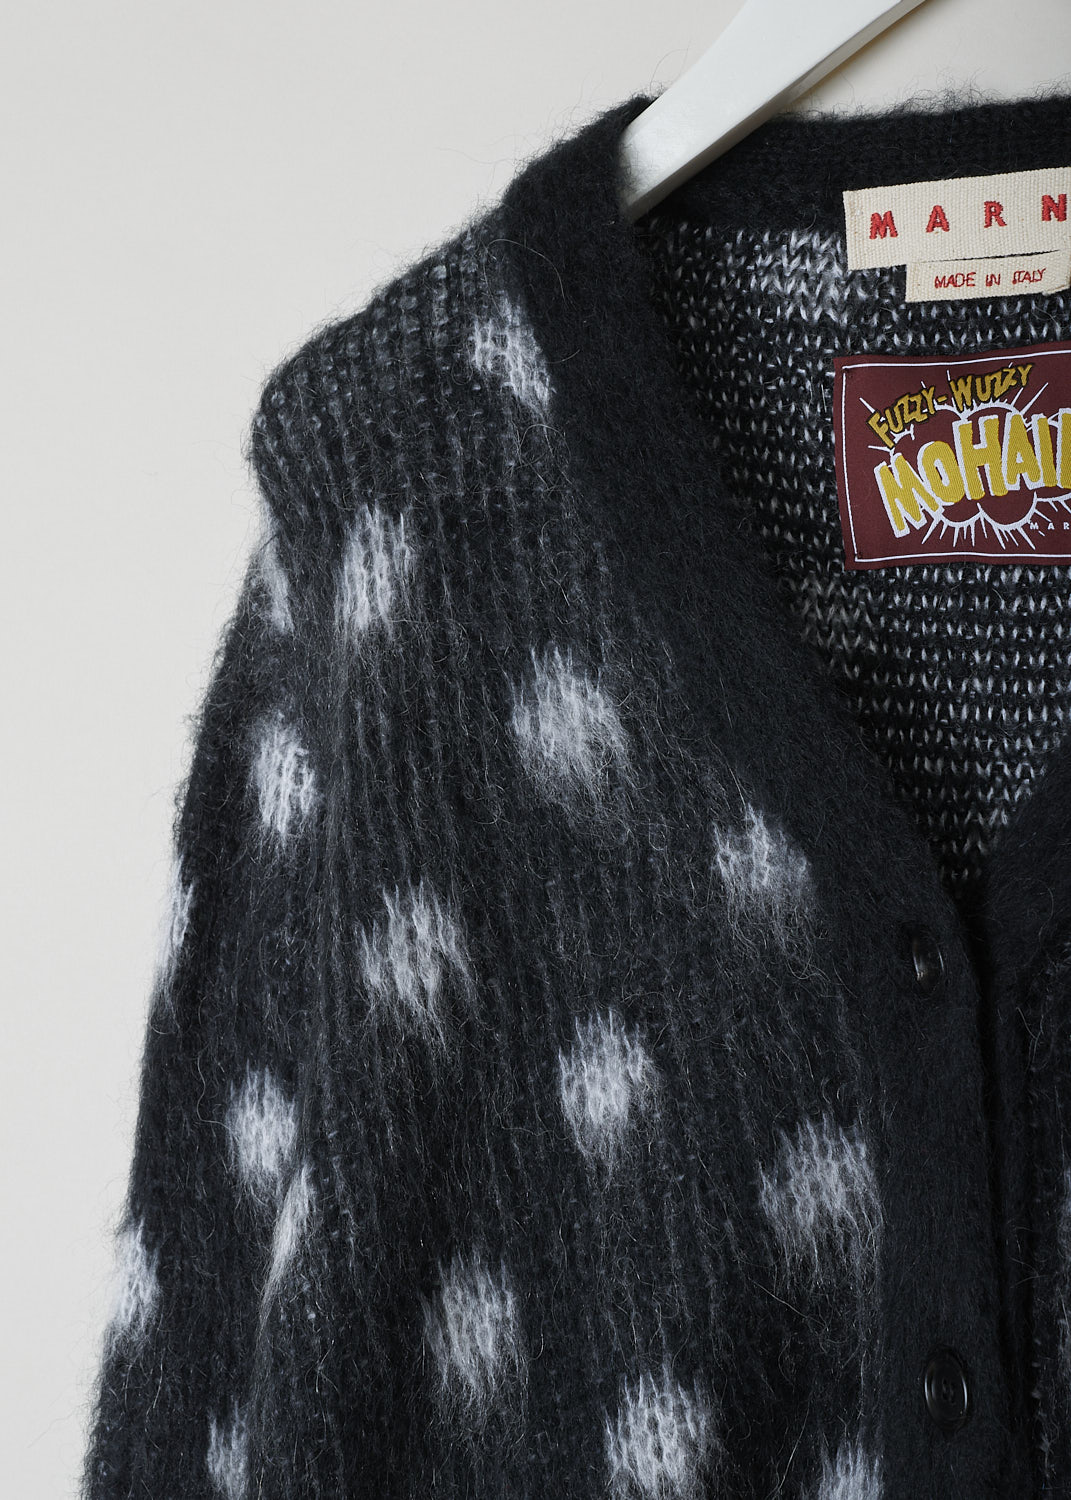 MARNI, BRUSHED DOTS FUZZY WUZZY CARDIGAN, CDMD0326Q0_UFU160_DON99, Black, Print, Grey, Detail, This brushed dots Fuzzy Wuzzy cardigan has a black V-neckline with a front button closure. The sweater has a two-tone dot pattern in black and grey. The long balloon sleeves have ribbed cuffs. That same ribbed finish can be found on the hemline.
